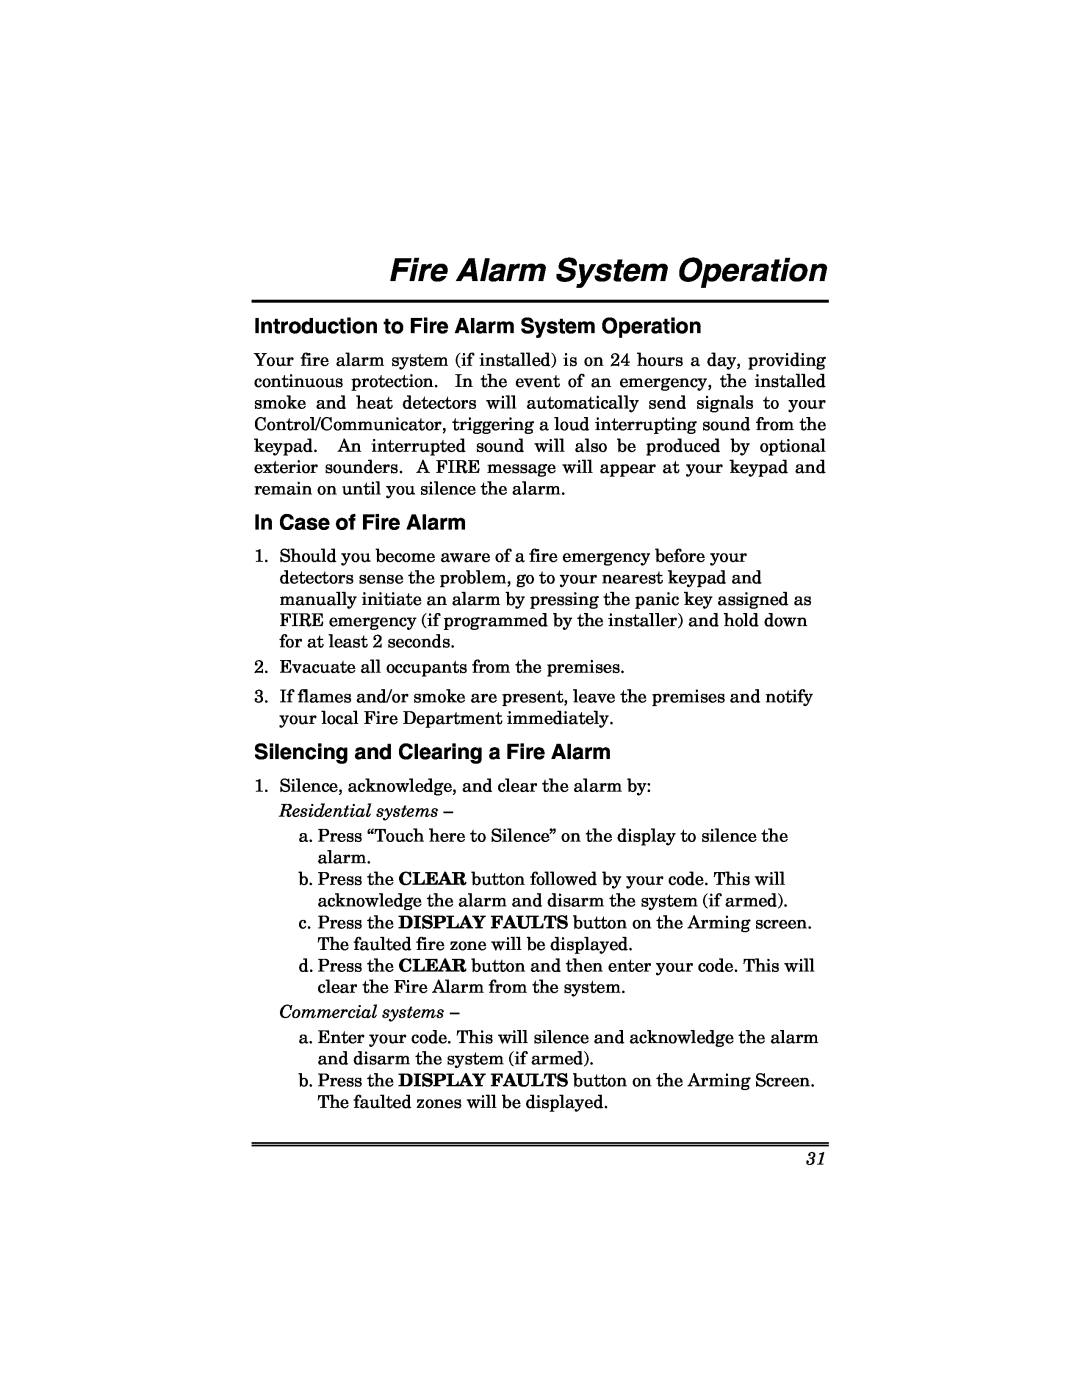 Honeywell 6271V manual Introduction to Fire Alarm System Operation, In Case of Fire Alarm, Commercial systems 